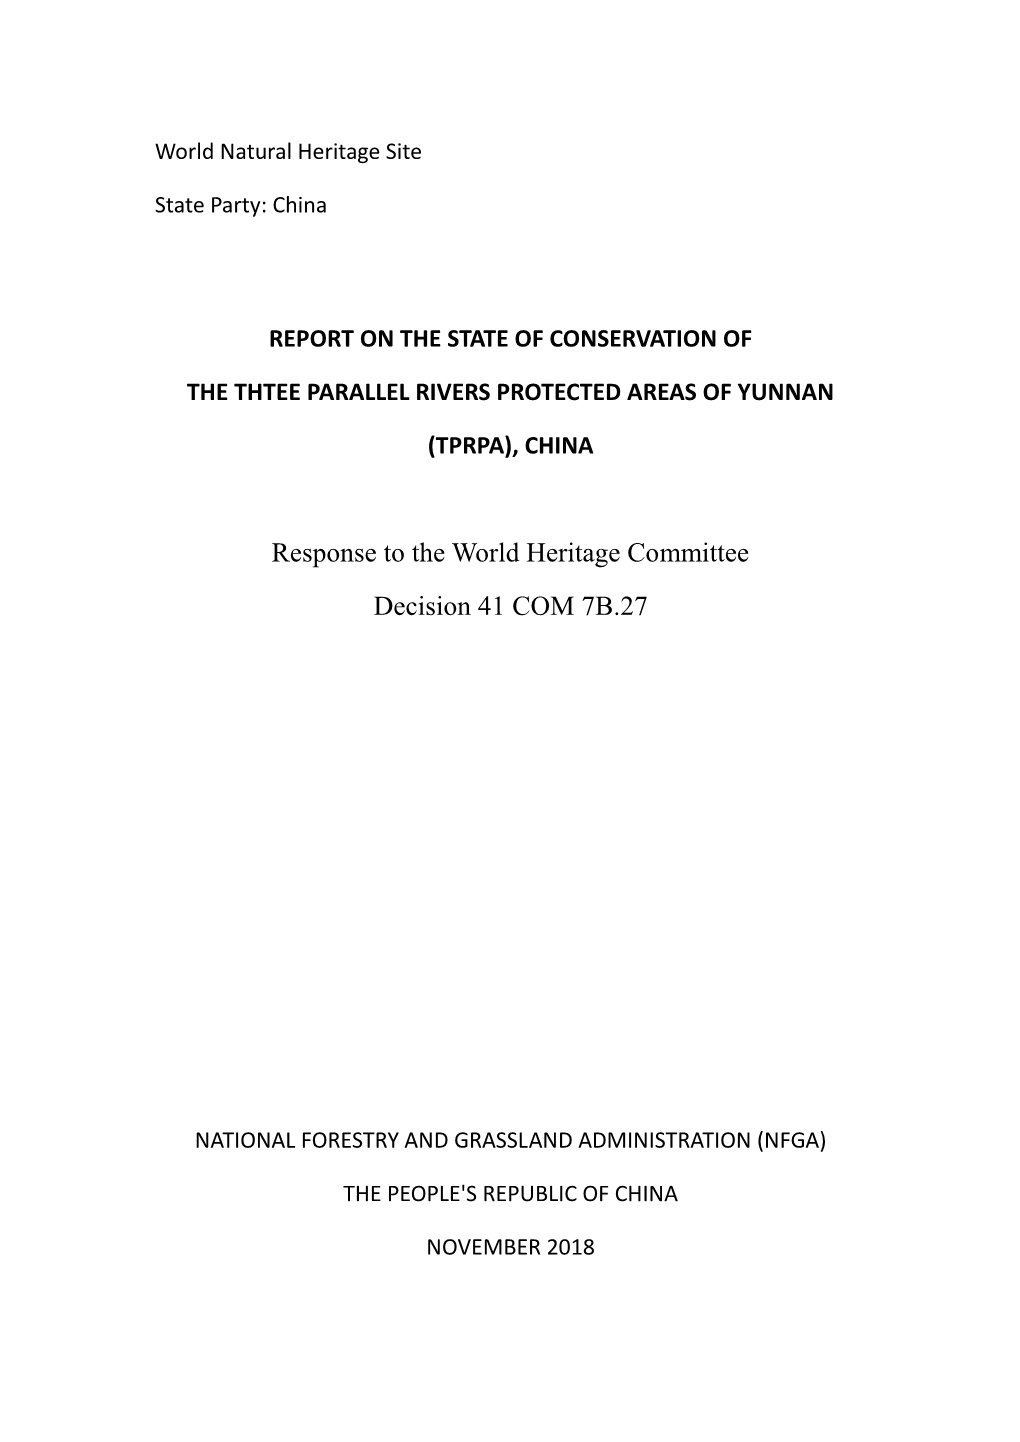 Response to the World Heritage Committee Decision 41 COM 7B.27